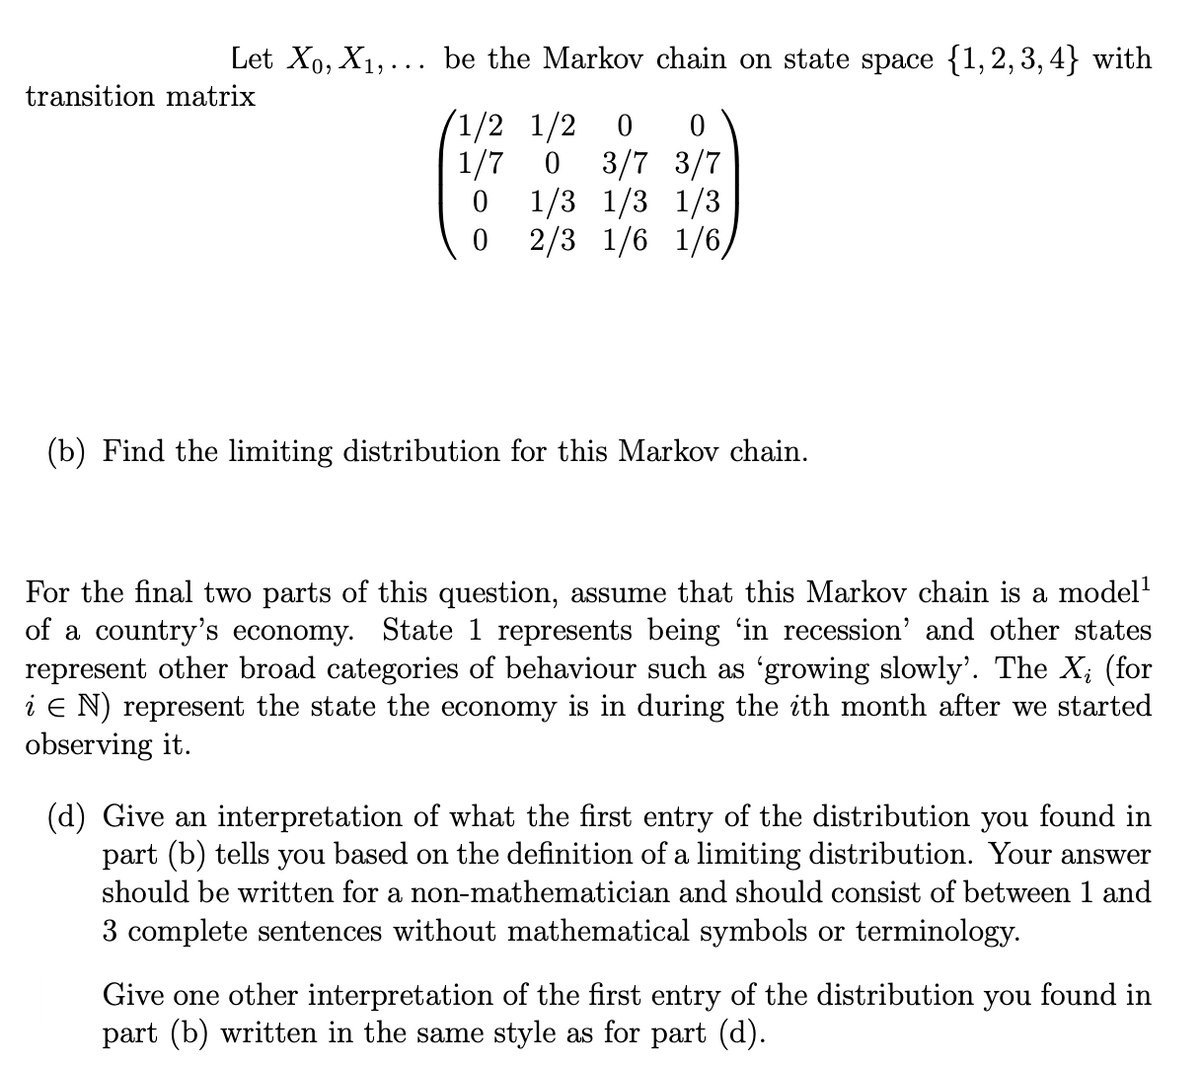 Let X₁, X₁,... be the Markov chain on state space {1,2,3,4} with
transition matrix
1/2 1/2 0
1/7 0
0
0
0
3/7 3/7
1/3 1/3 1/3
2/3 1/6 1/6/
(b) Find the limiting distribution for this Markov chain.
For the final two parts of this question, assume that this Markov chain is a model¹
of a country's economy. State 1 represents being 'in recession' and other states
represent other broad categories of behaviour such as 'growing slowly'. The X; (for
i E N) represent the state the economy is in during the ith month after we started
observing it.
(d) Give an interpretation of what the first entry of the distribution you found in
part (b) tells you based on the definition of a limiting distribution. Your answer
should be written for a non-mathematician and should consist of between 1 and
3 complete sentences without mathematical symbols or terminology.
Give one other interpretation of the first entry of the distribution you found in
part (b) written in the same style as for part (d).